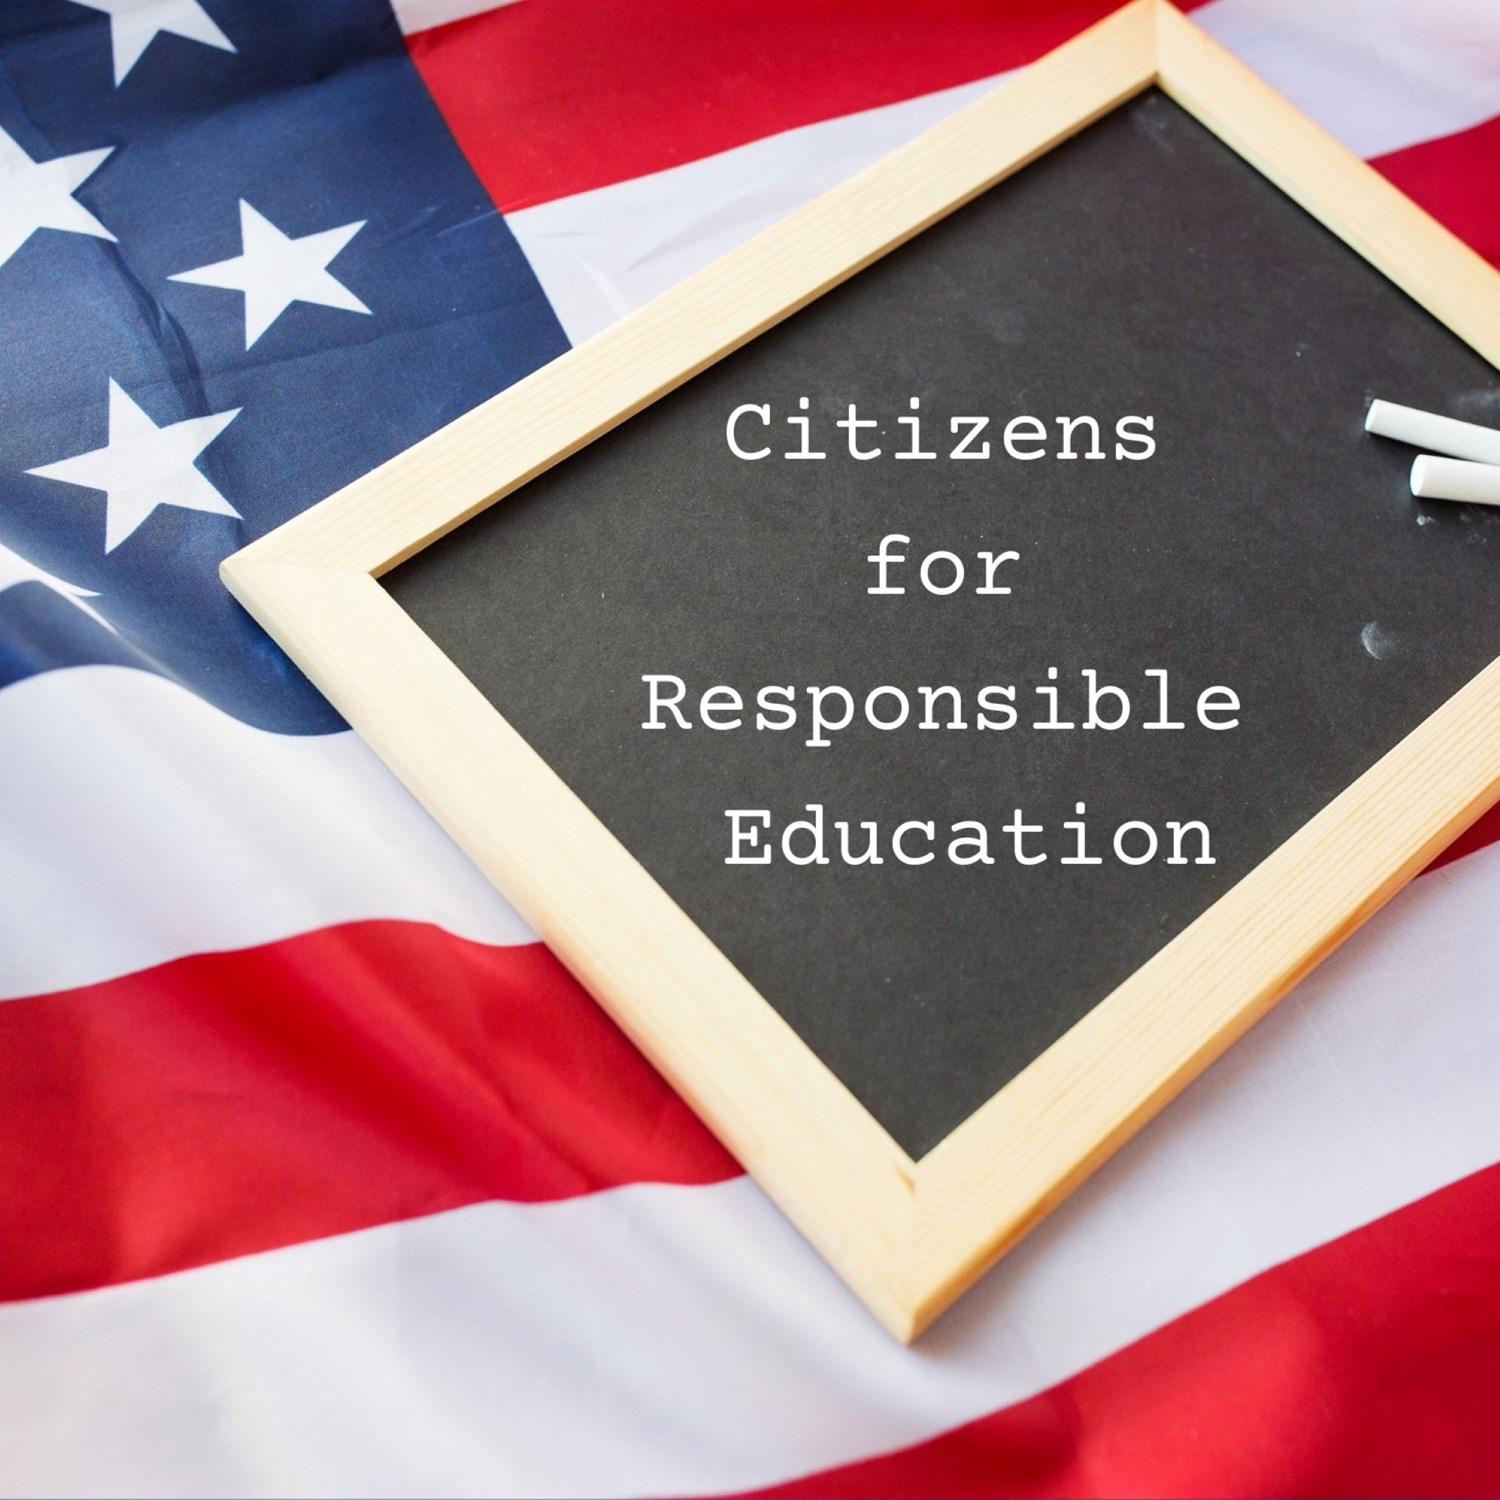 Citizens for Responsible Education